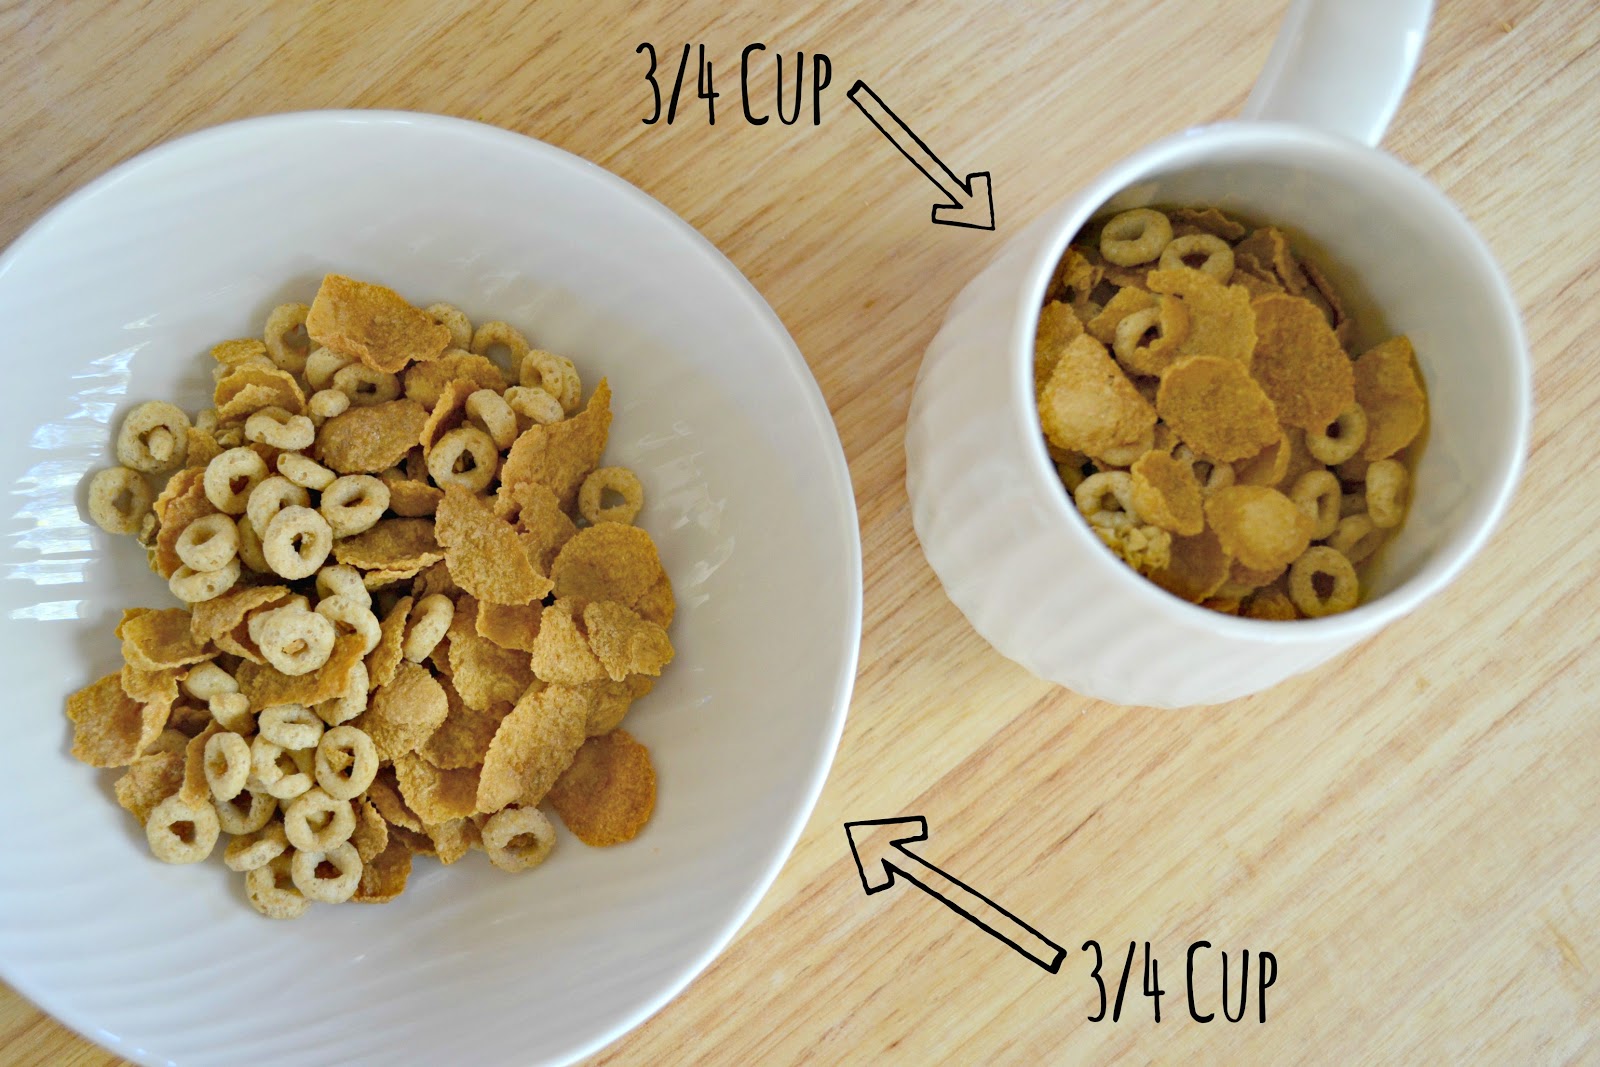 cereal+portions+text.jpg